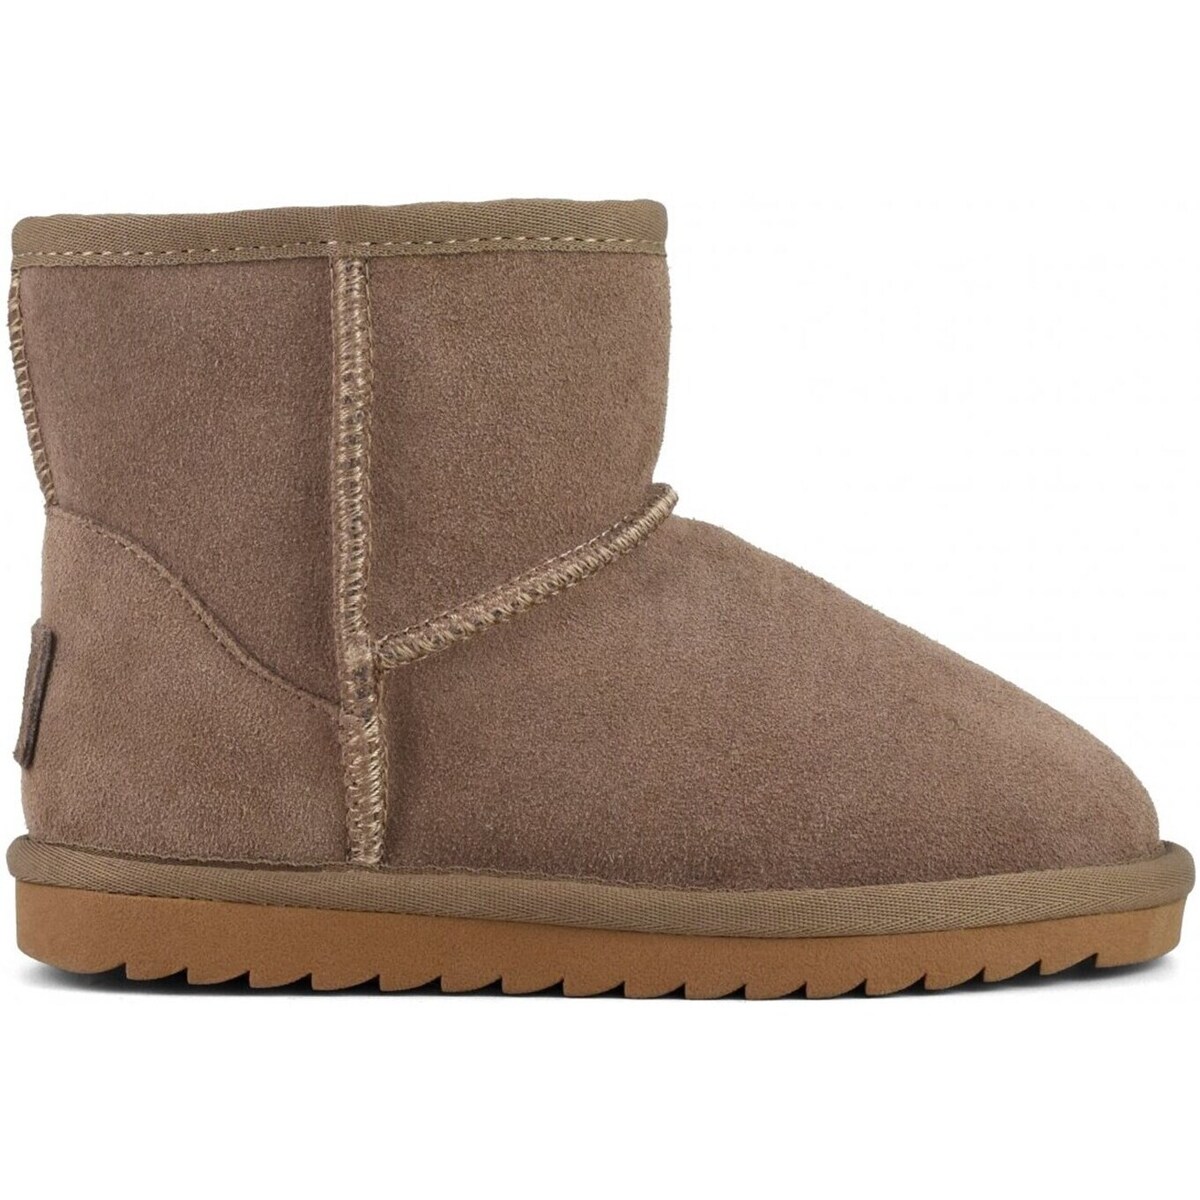 Schuhe Mädchen Boots Colors of California ugg boot Ankle Kind Taupe Multicolor